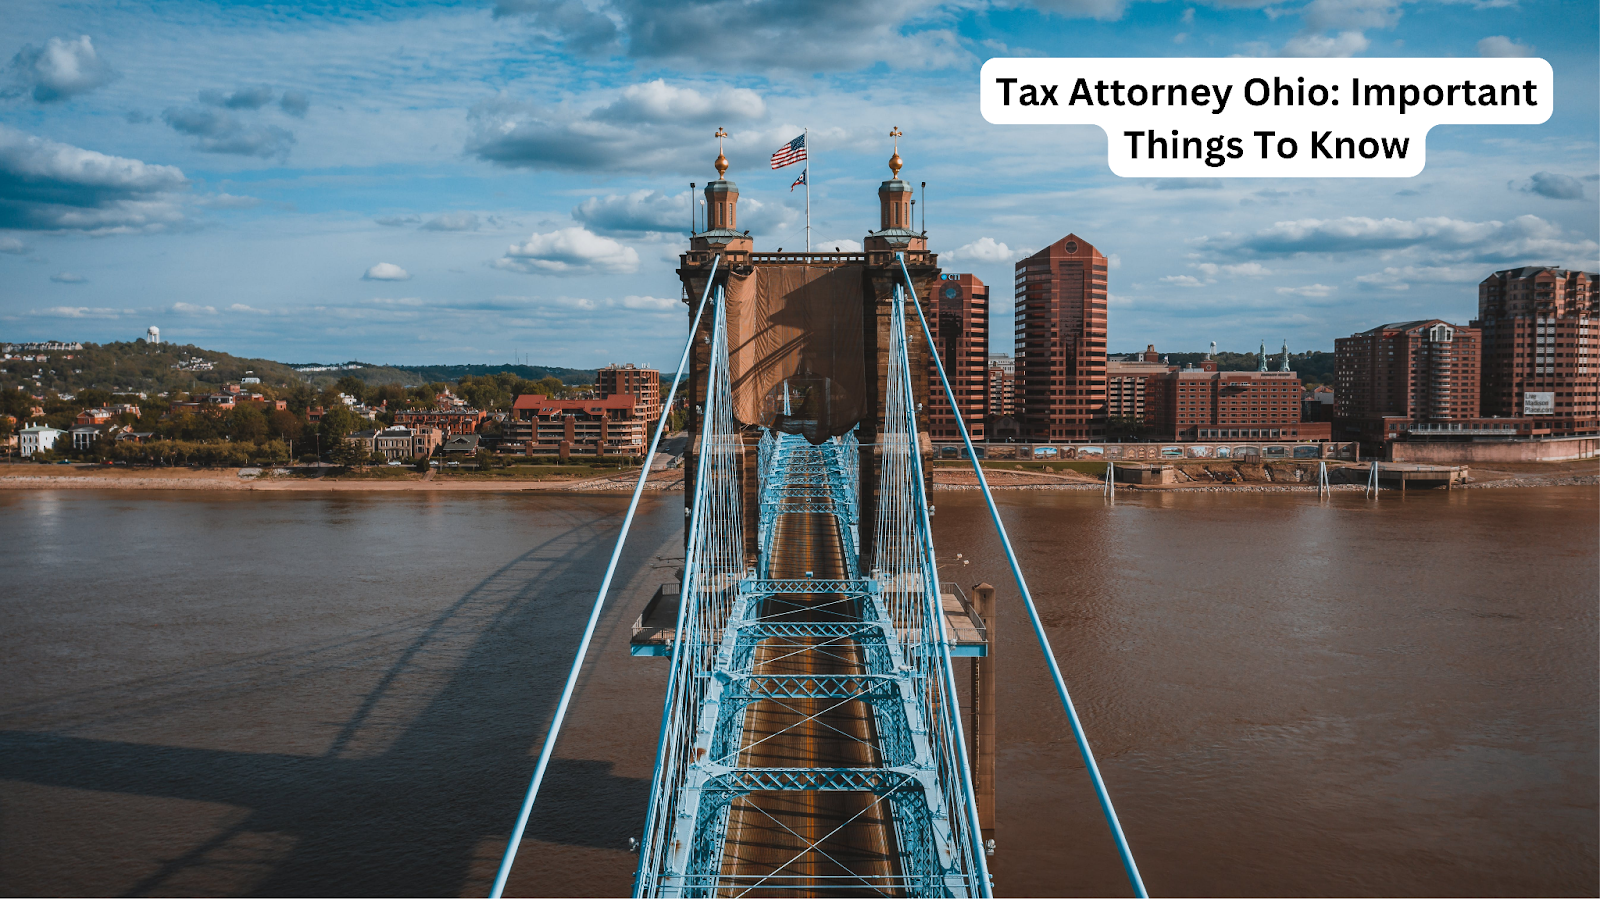 Tax Attorney Ohio: Important Things To Know